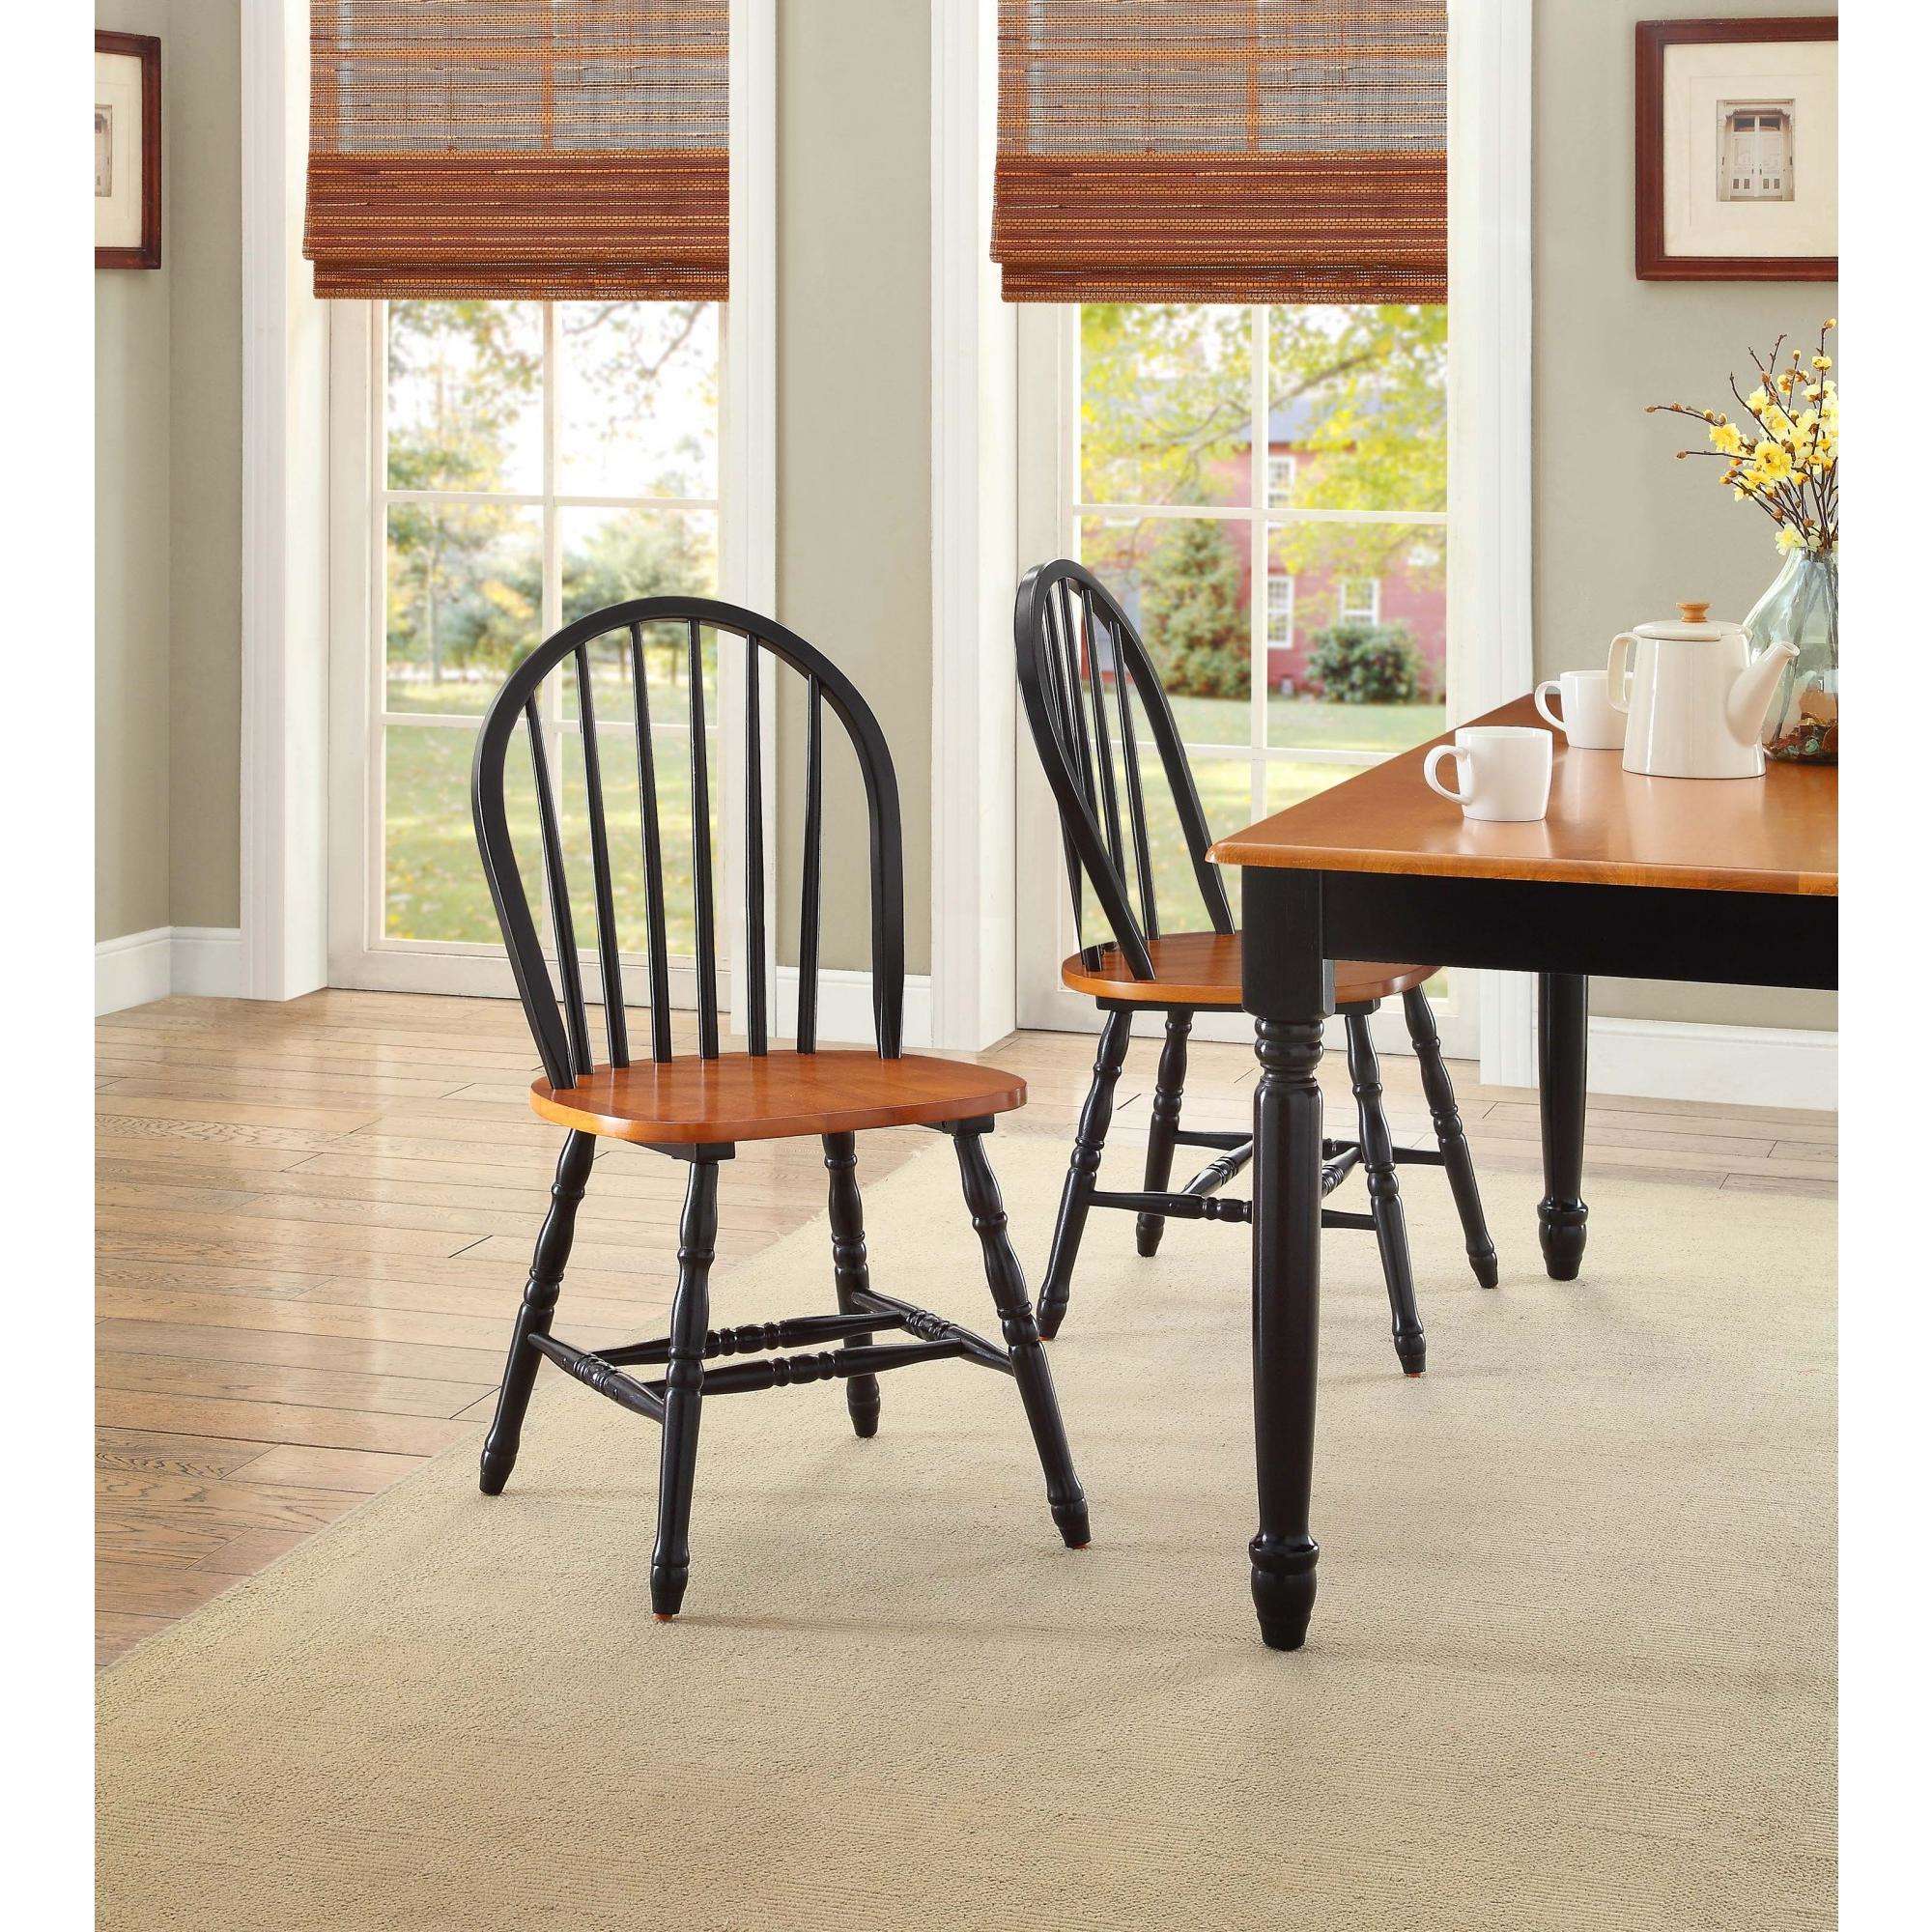 Better Homes and Gardens Autumn Lane Windsor Solid Wood Chairs, Set of 2, Black and Oak - image 1 of 8